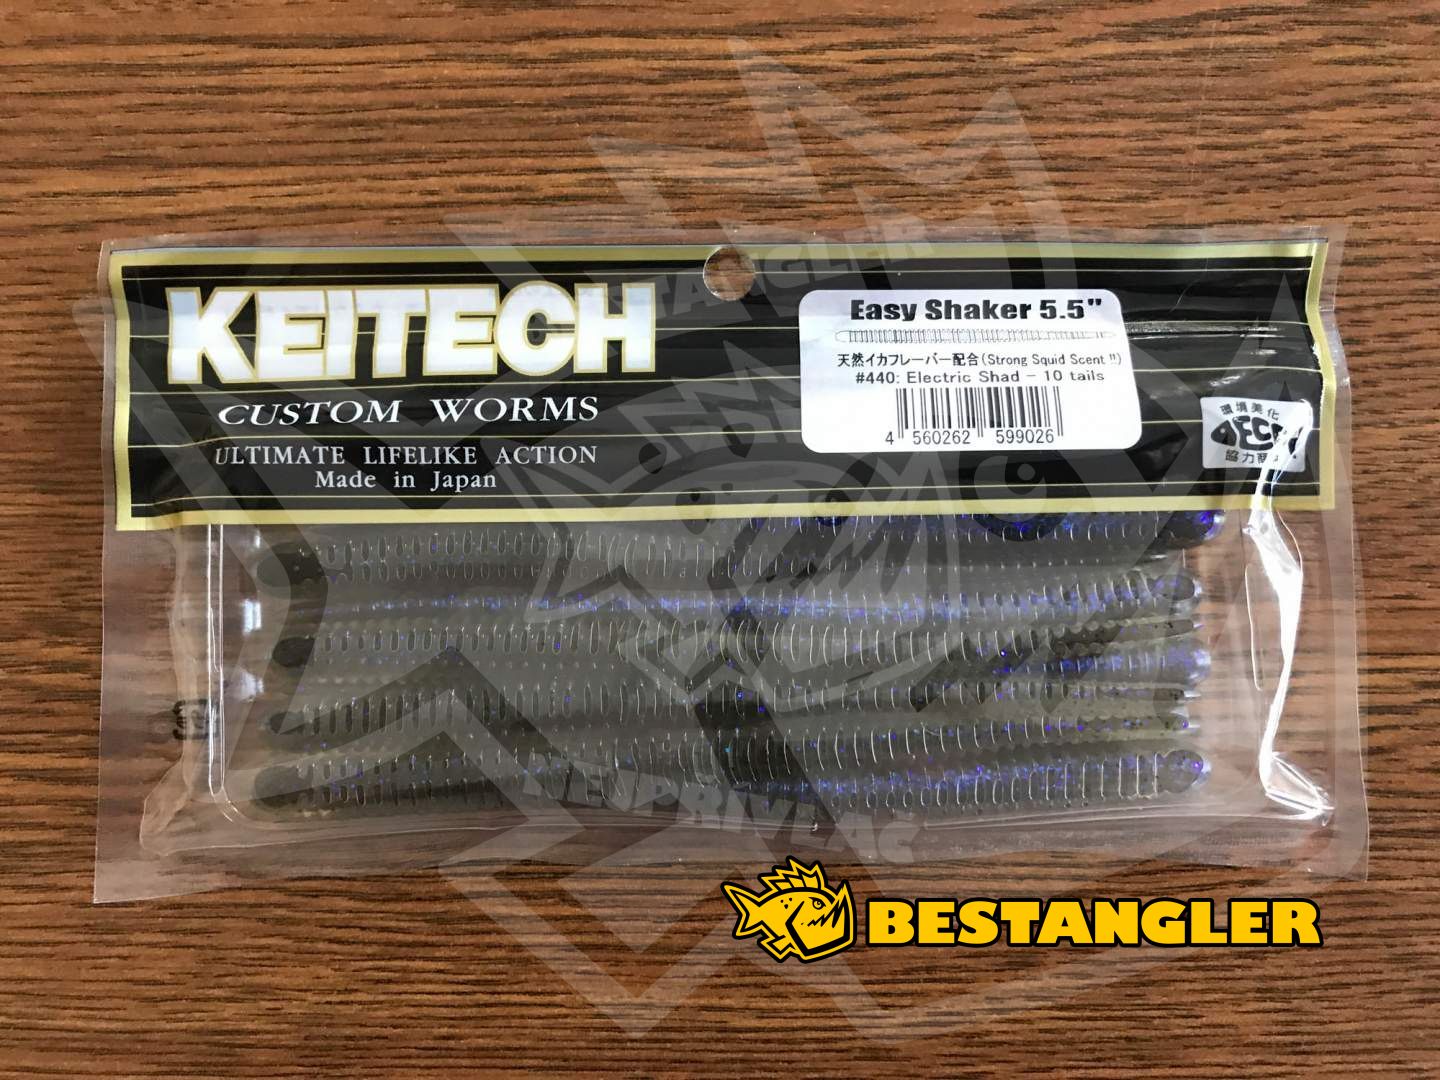 Keitech Easy Shaker 5.5 Electric Shad